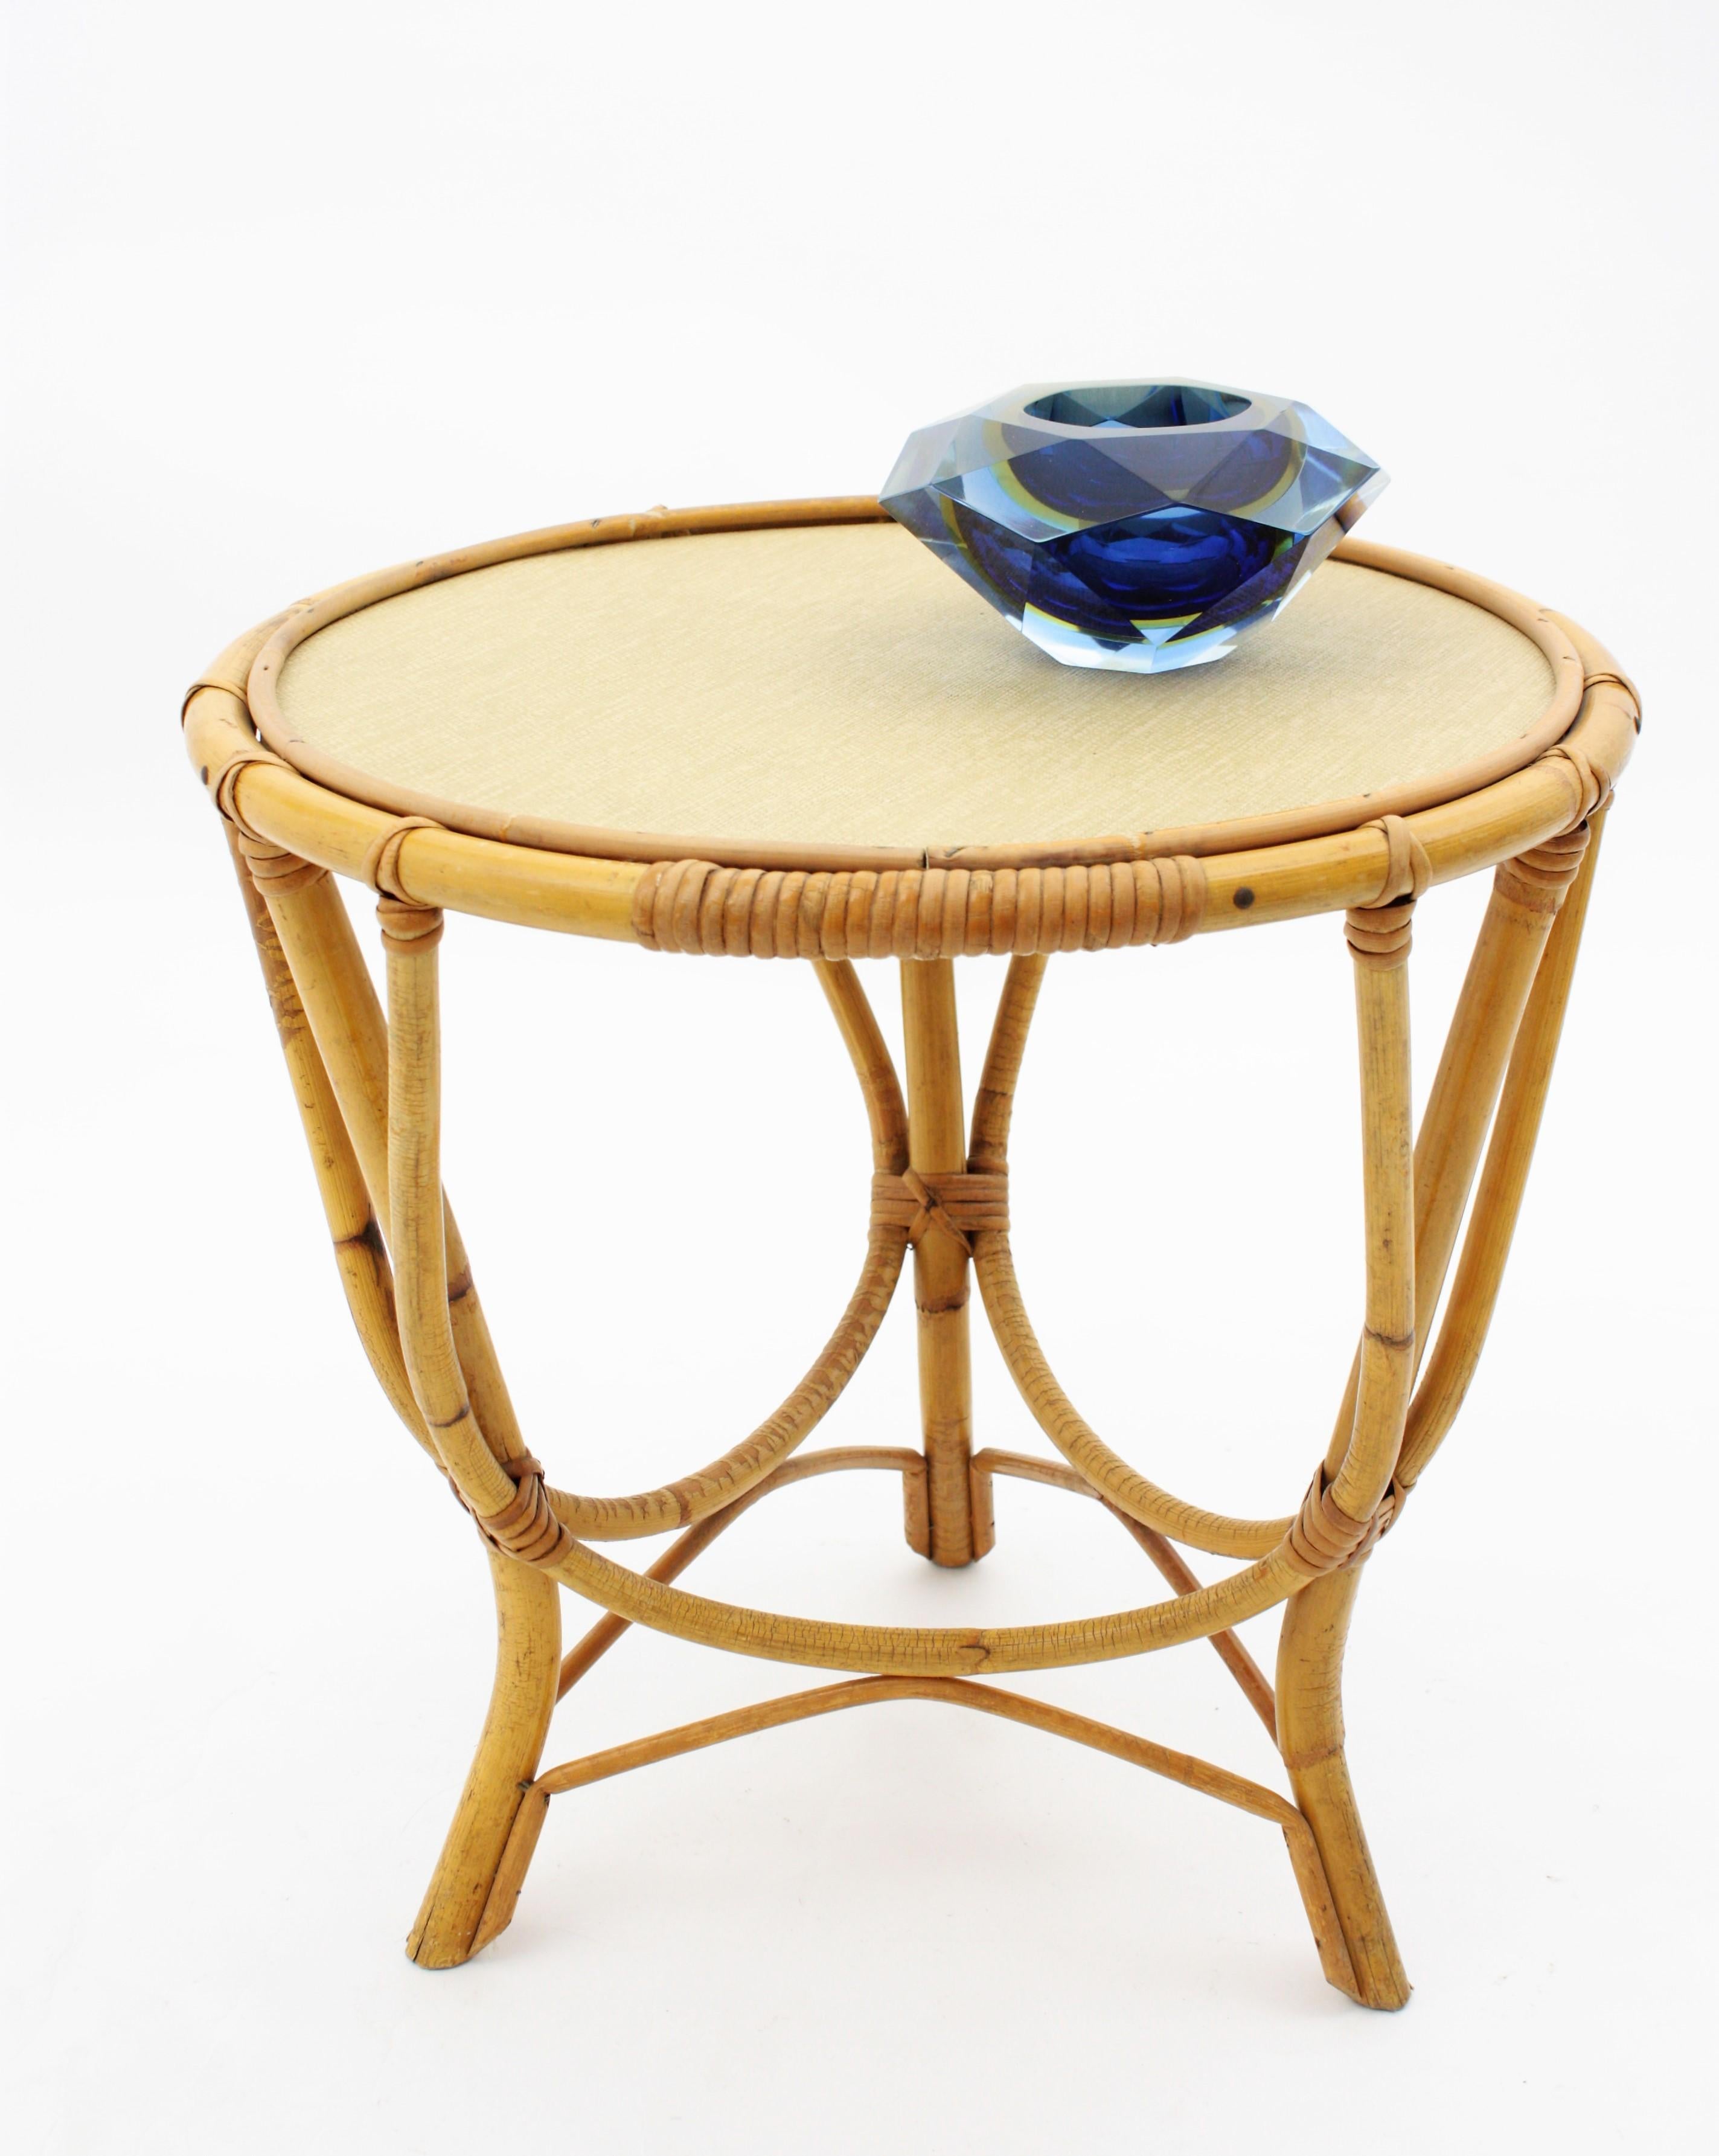 Eye-catching bamboo and rattan round coffee table / side table. Handcrafted in Spain at the 1960s.
It has reminiscences from Franco Albini designs and all the taste and freshness of the Mediterranean style
Lovely to be used as coffee table, drinks